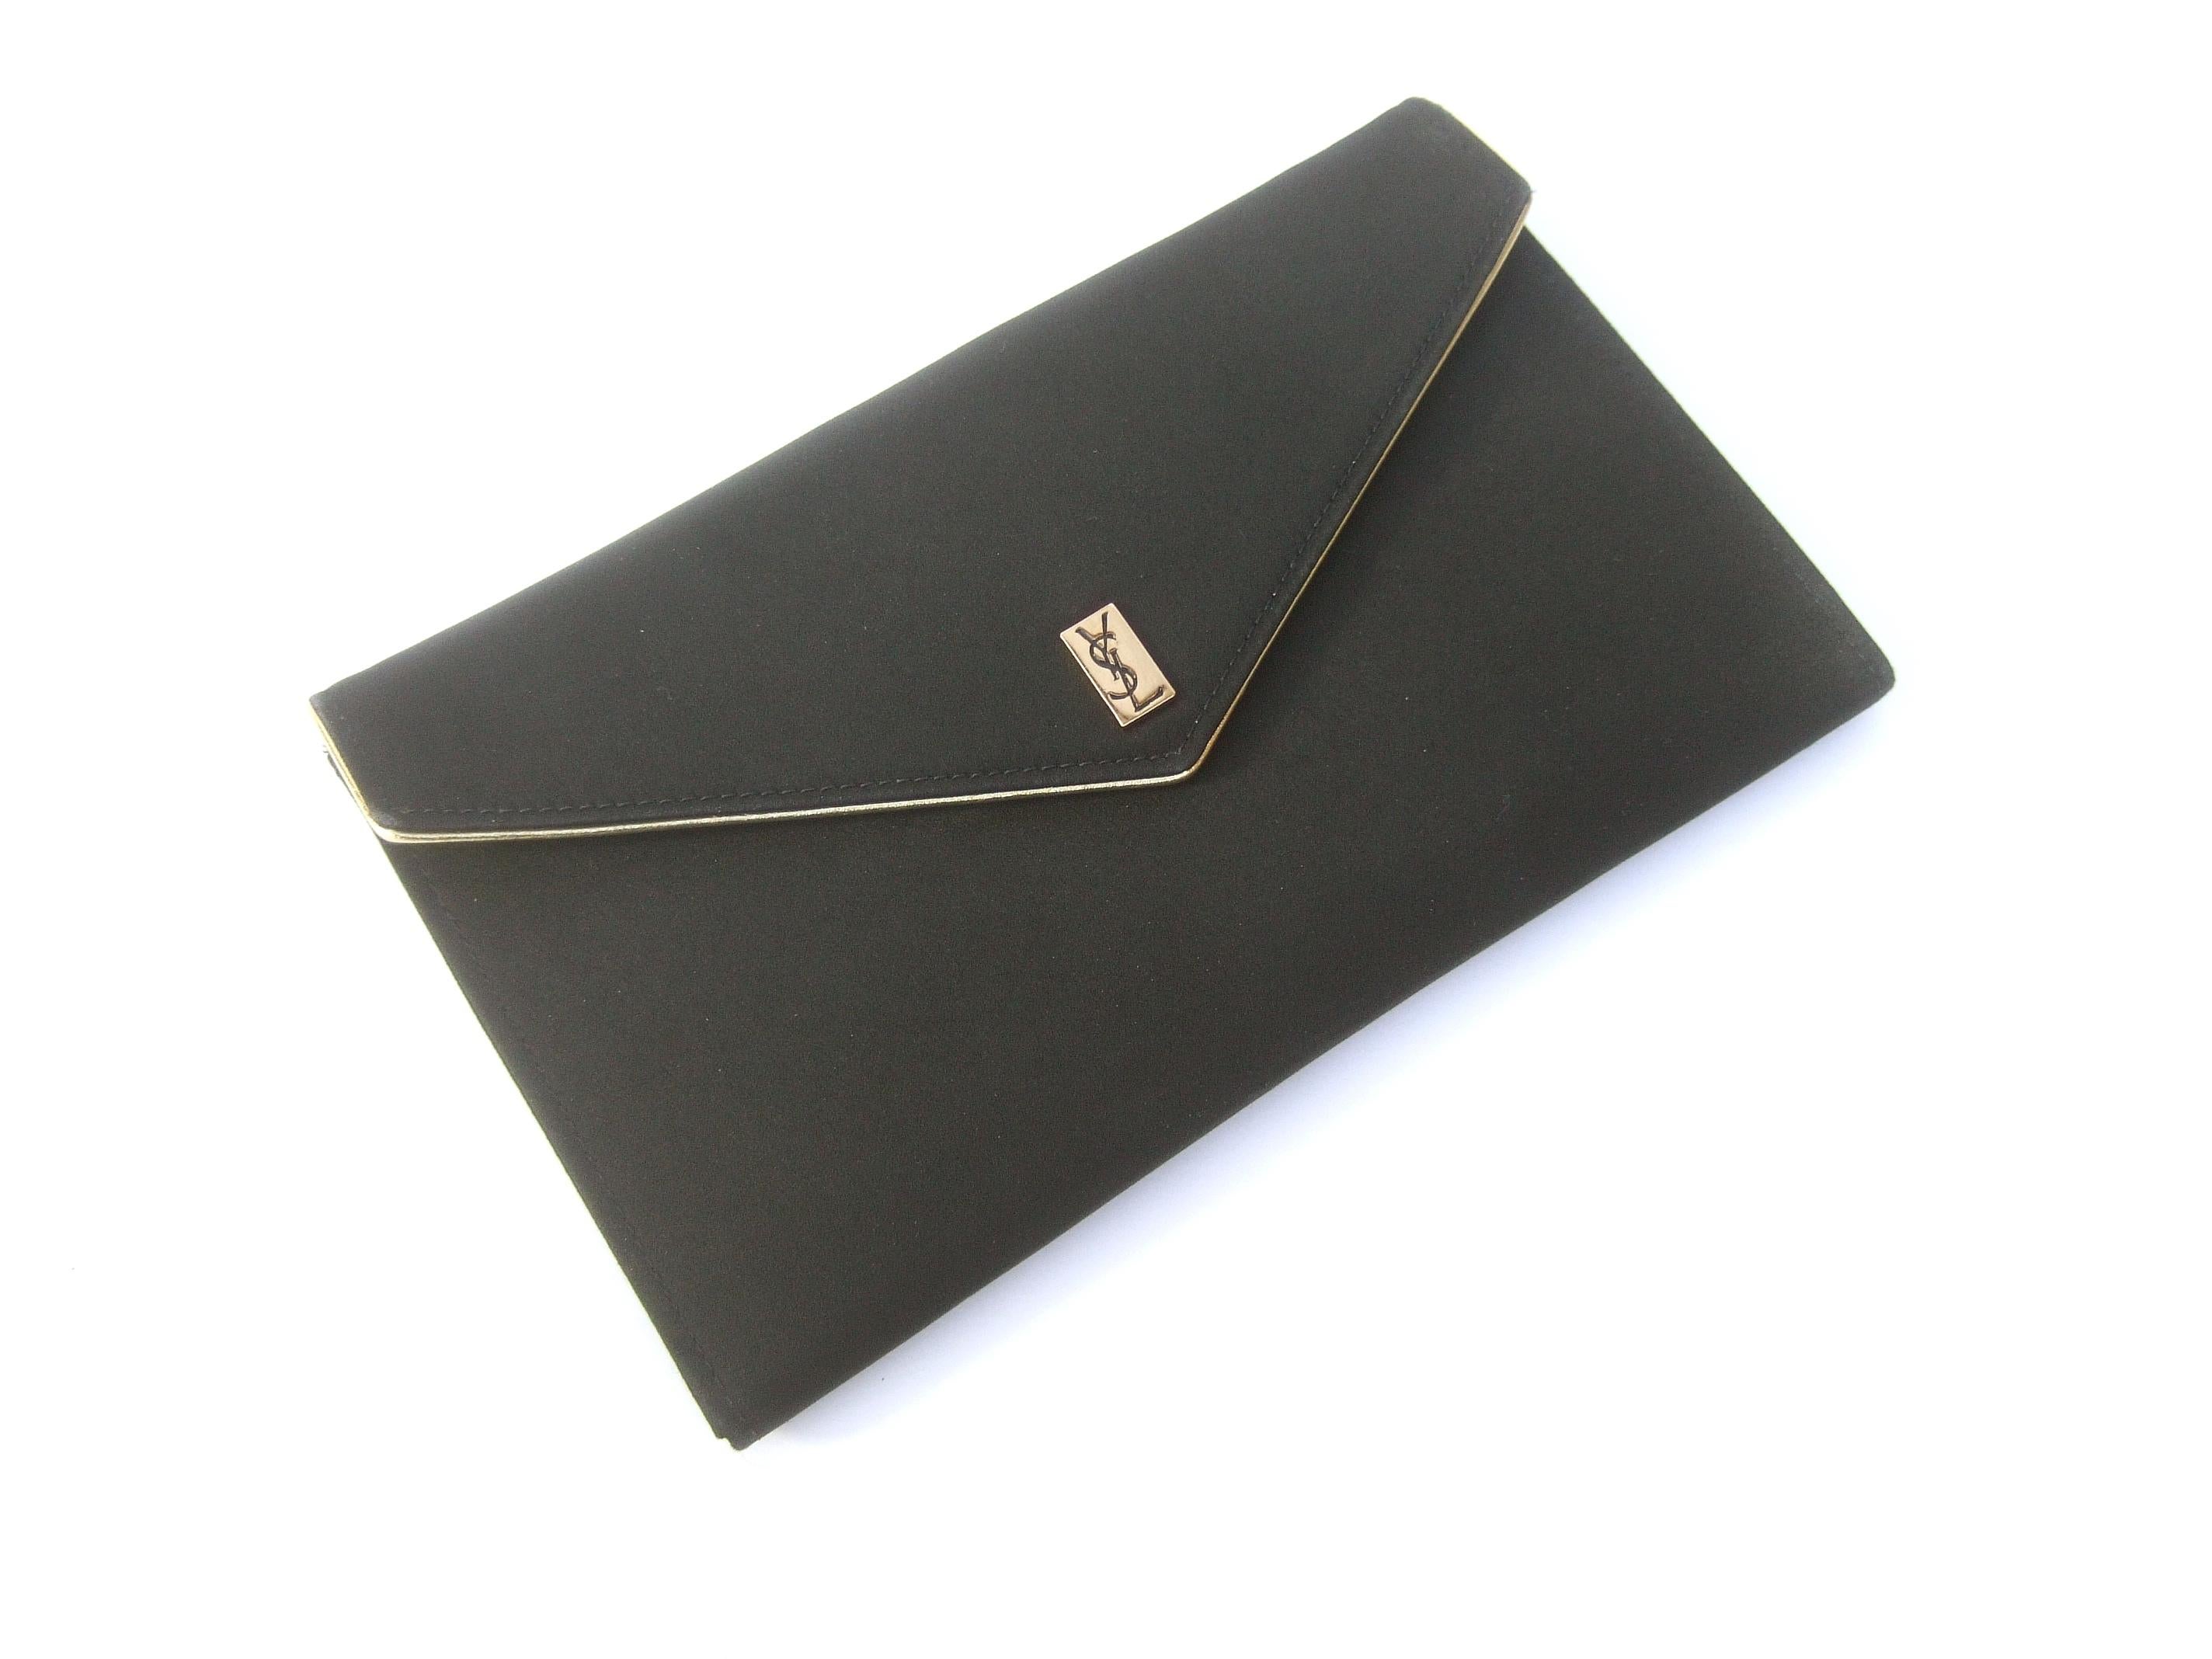 Yves Saint Laurent Black satin clutch bag c 1980s
The elegant clutch is adorned with Saint Laurent's iconic restrained YSL initials on a gilt metal plate on the front flap cover. The flap cover is accented with gold metallic piping trim

The